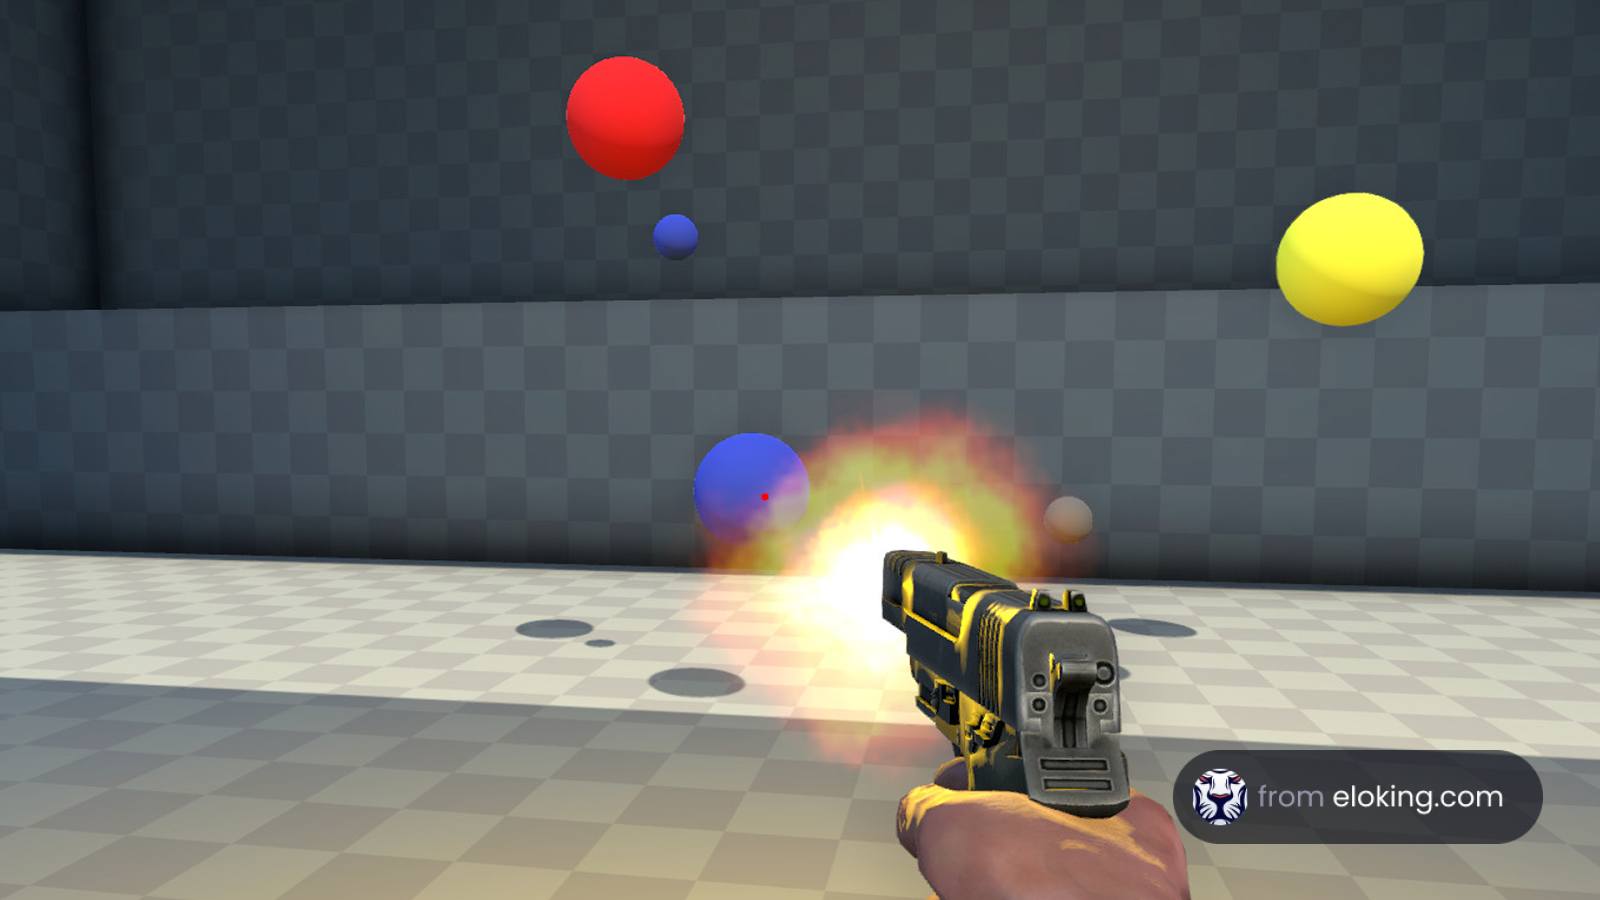 First-person shooter game scene with gun firing and colorful balls in mid-air